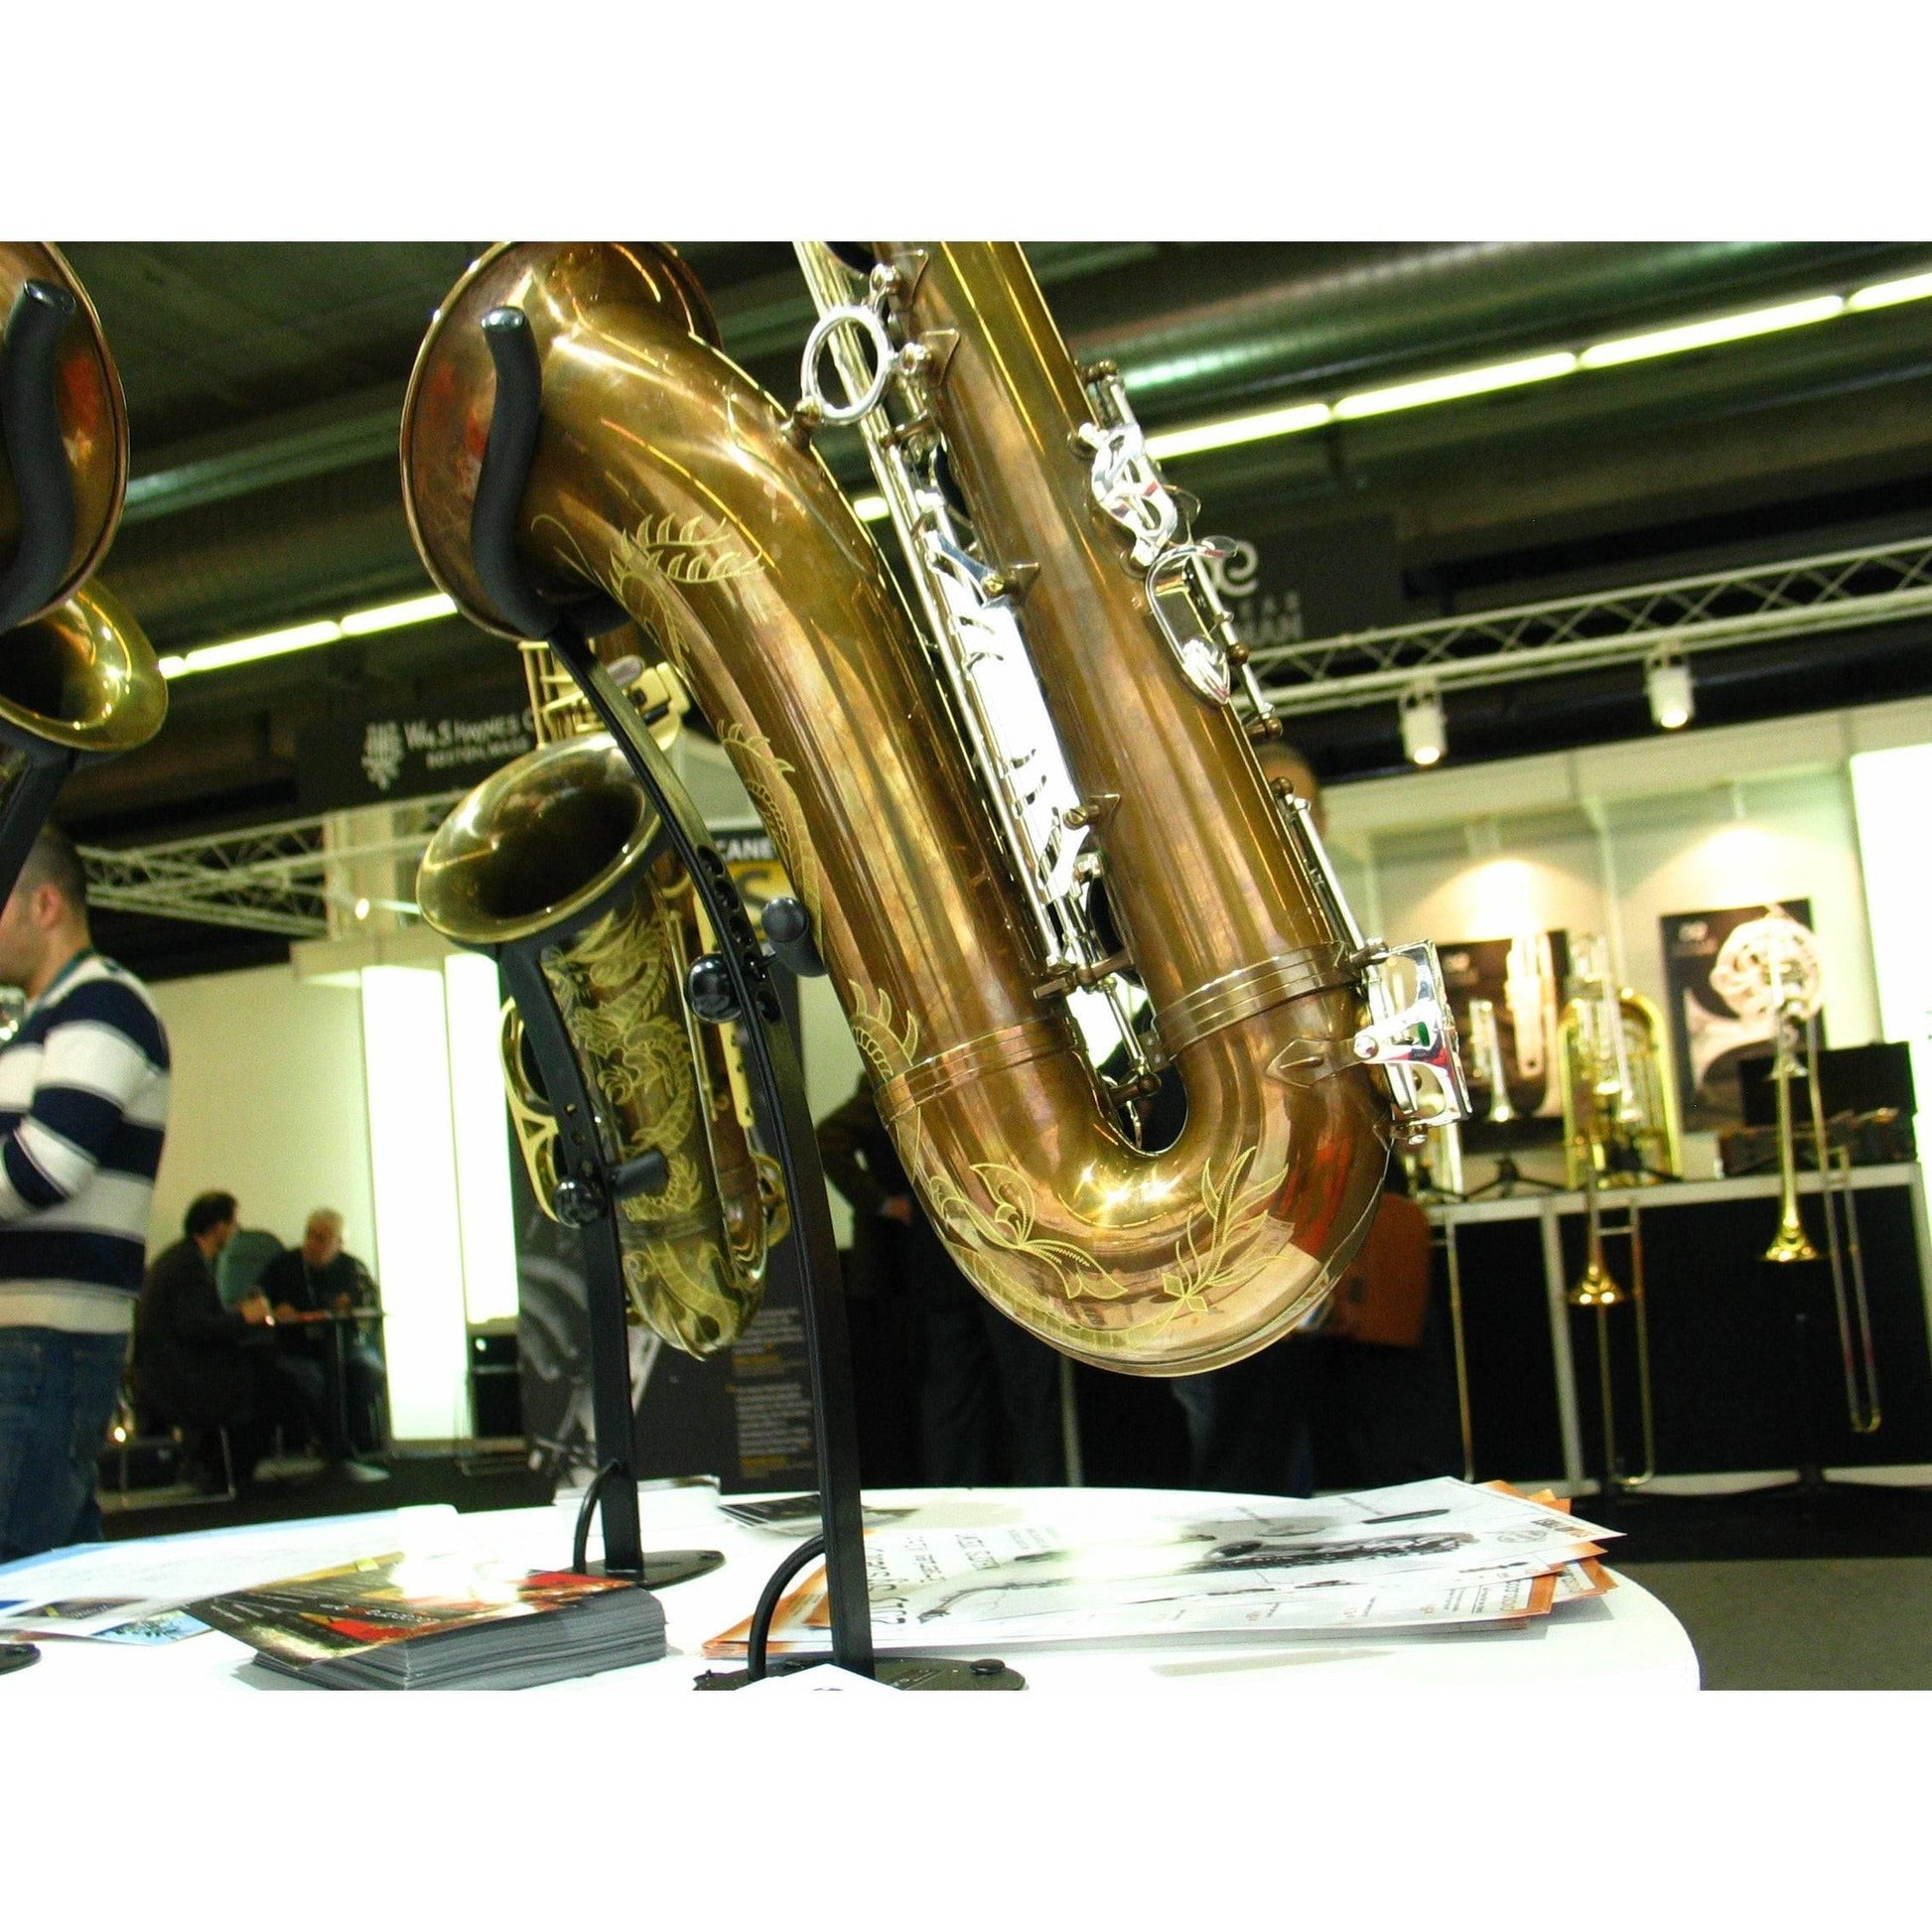 close up exhibit desktop tenor saxophone stands with instruments on display in the foreground by Locoparasaxo